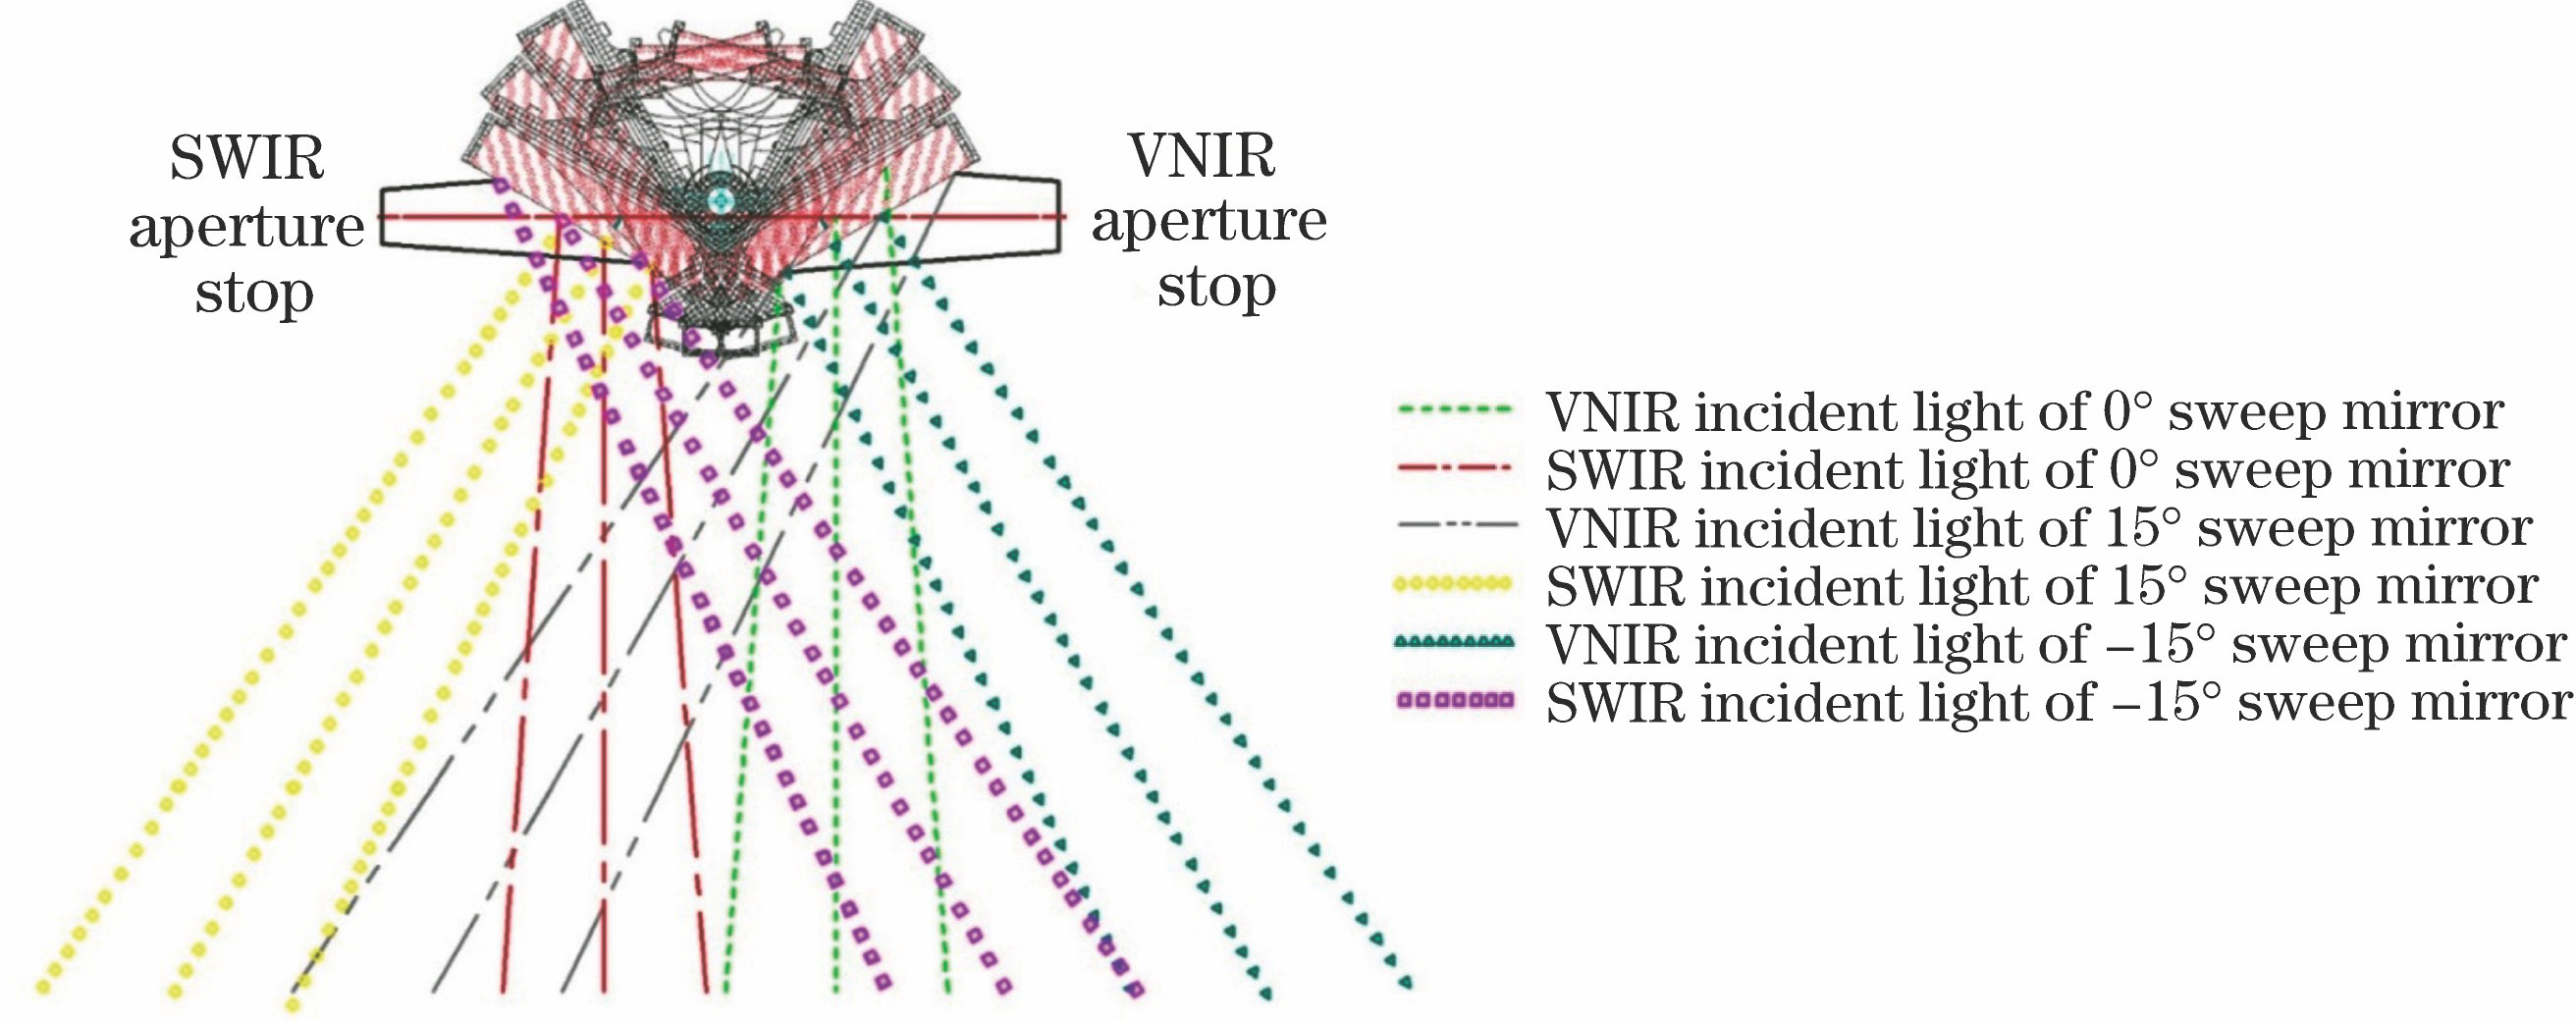 Incident field of view of imaging spectrometer at different sweep mirror locations